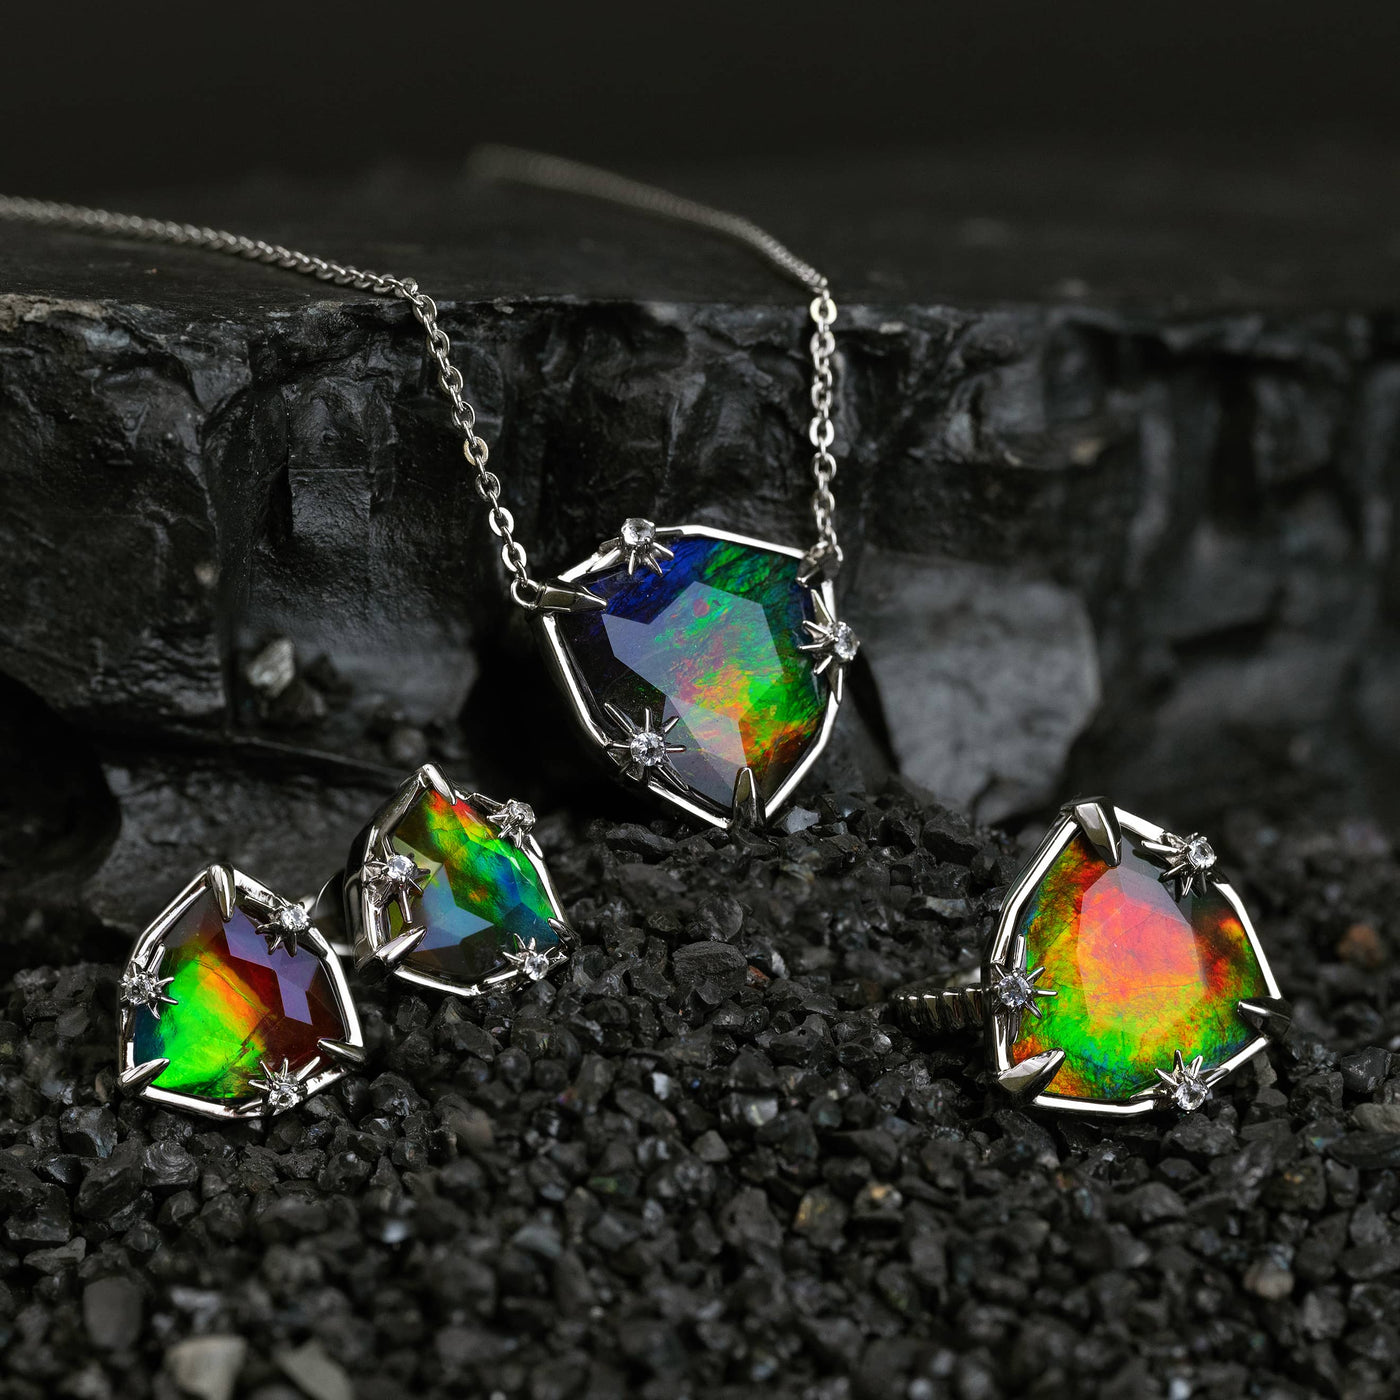 Starlight Trillion Ammolite Stud Earrings with White Topaz in Sterling Silver